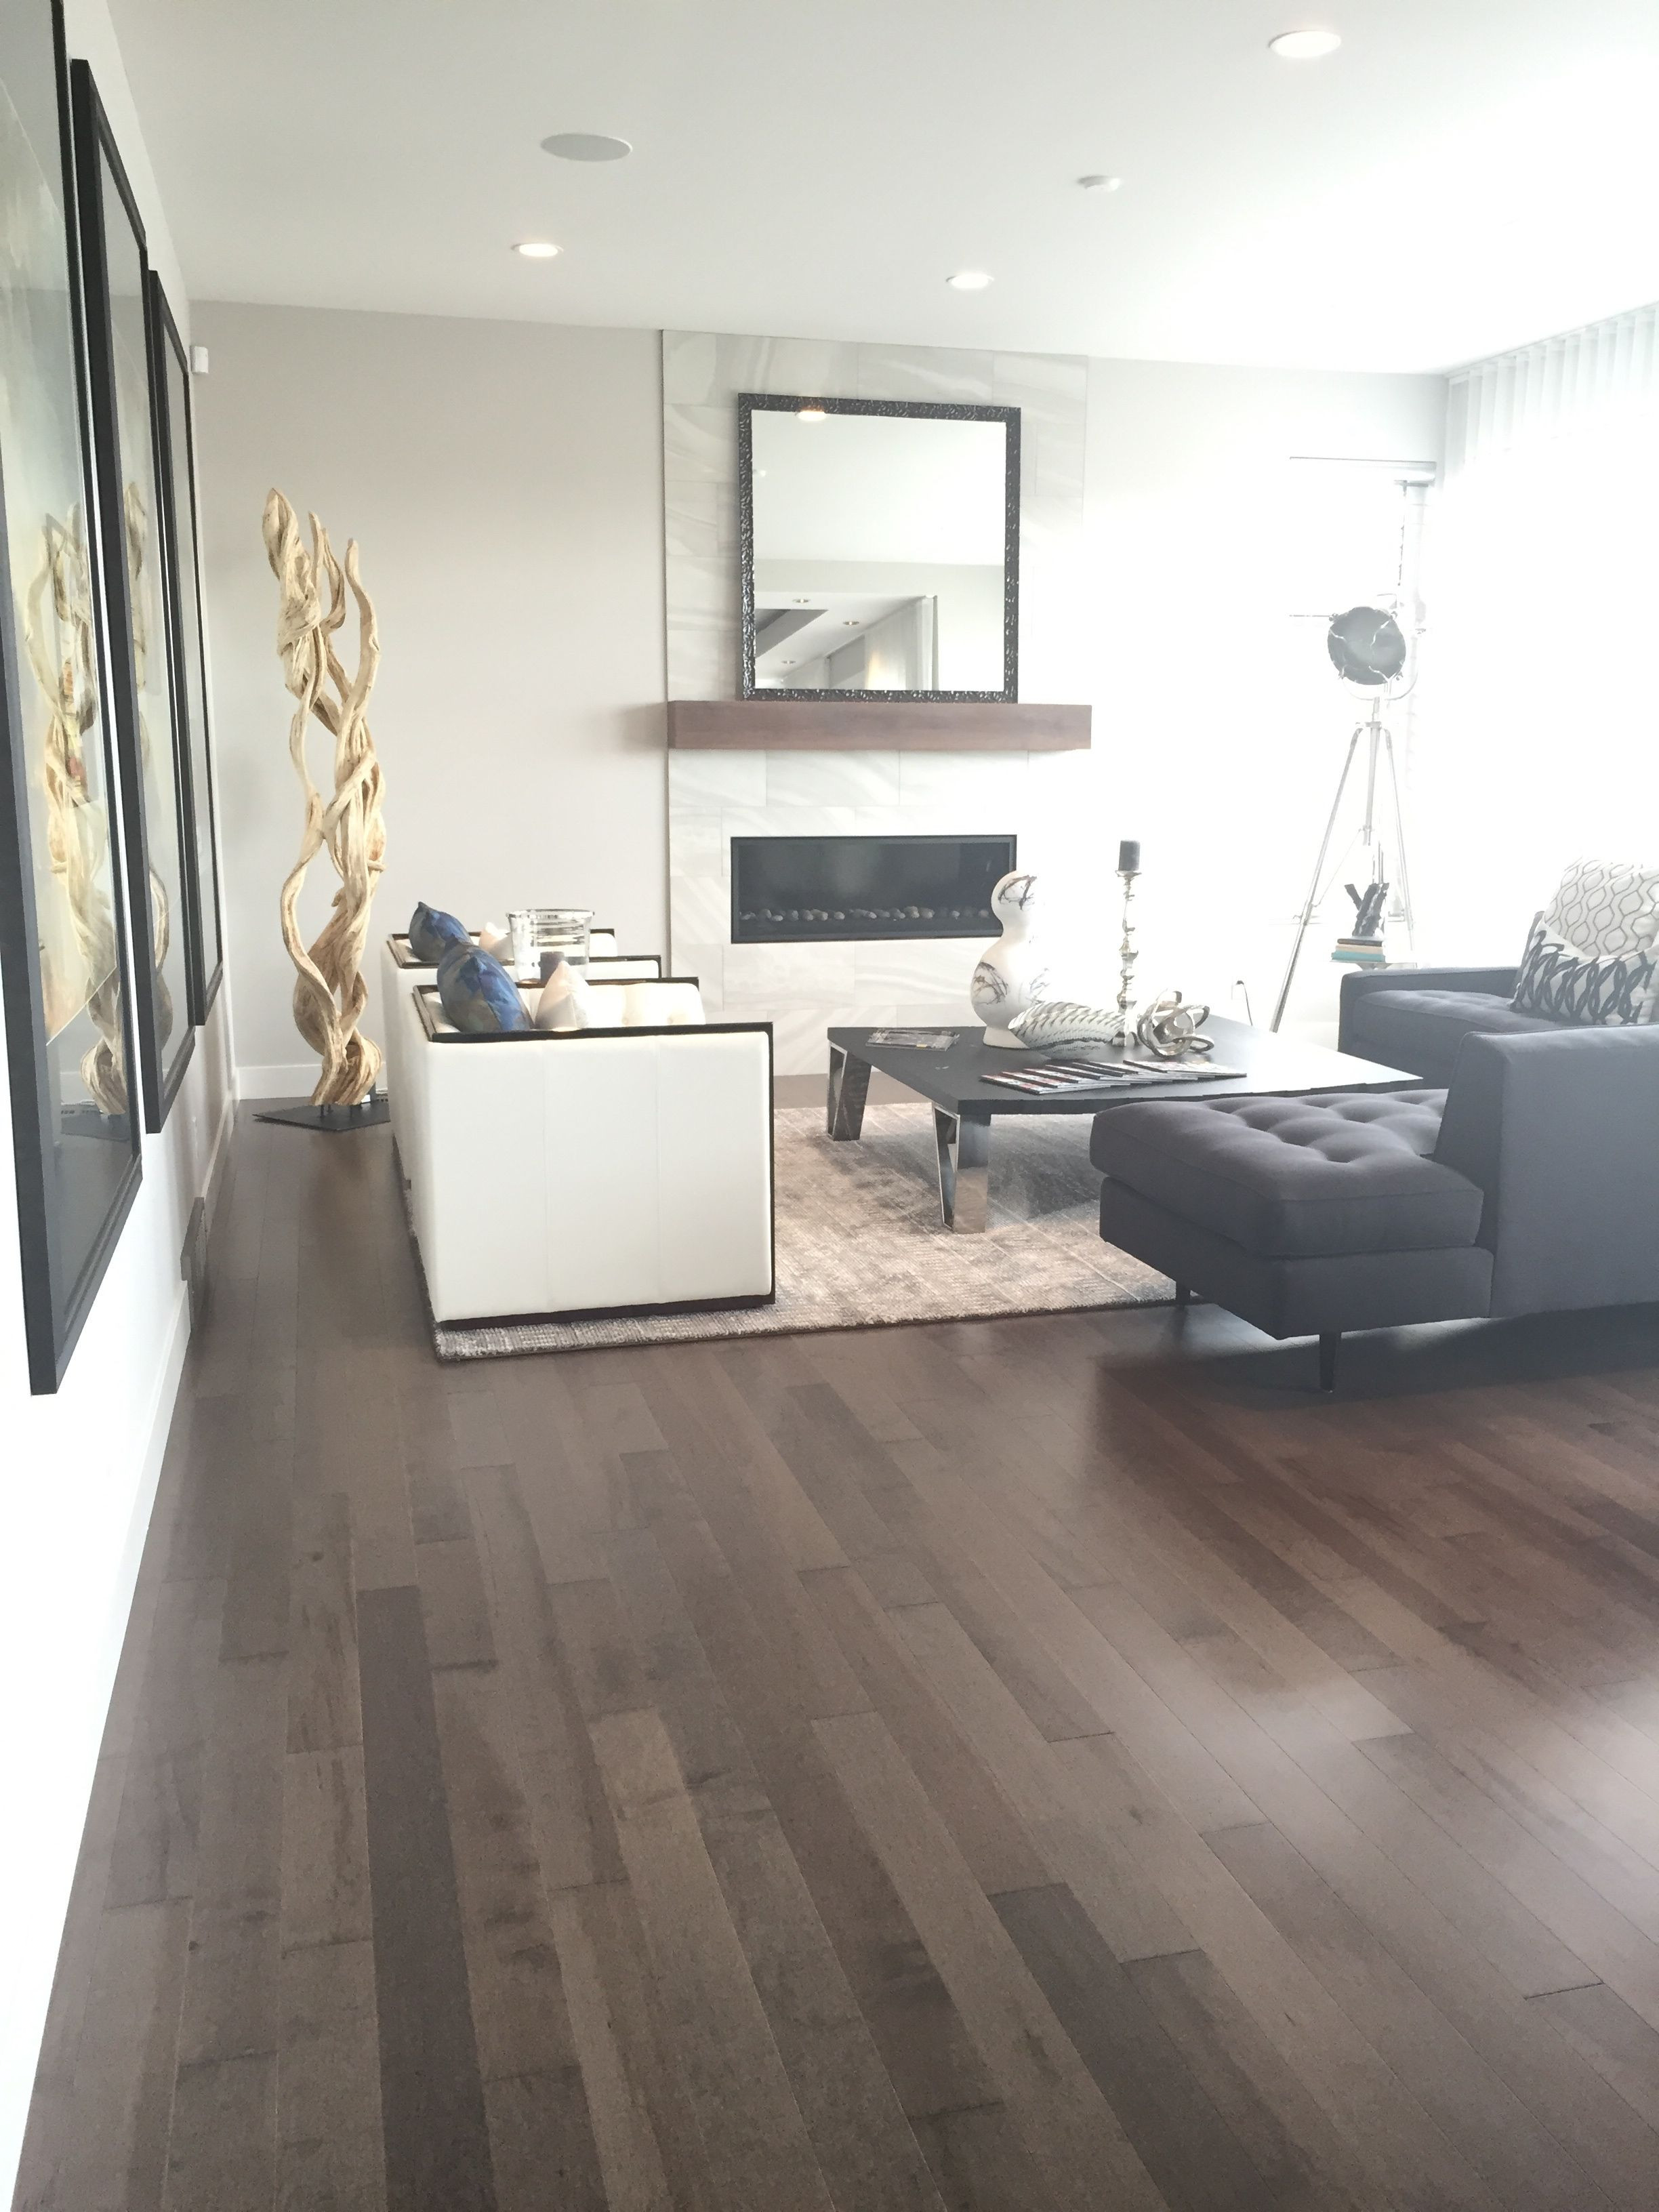 22 Amazing Benefits Of Hardwood Flooring Vs Laminate 2022 free download benefits of hardwood flooring vs laminate of smoky grey essential hard maple tradition lauzon hardwood throughout beautiful living room from the cantata showhome featuring lauzons smokey gre